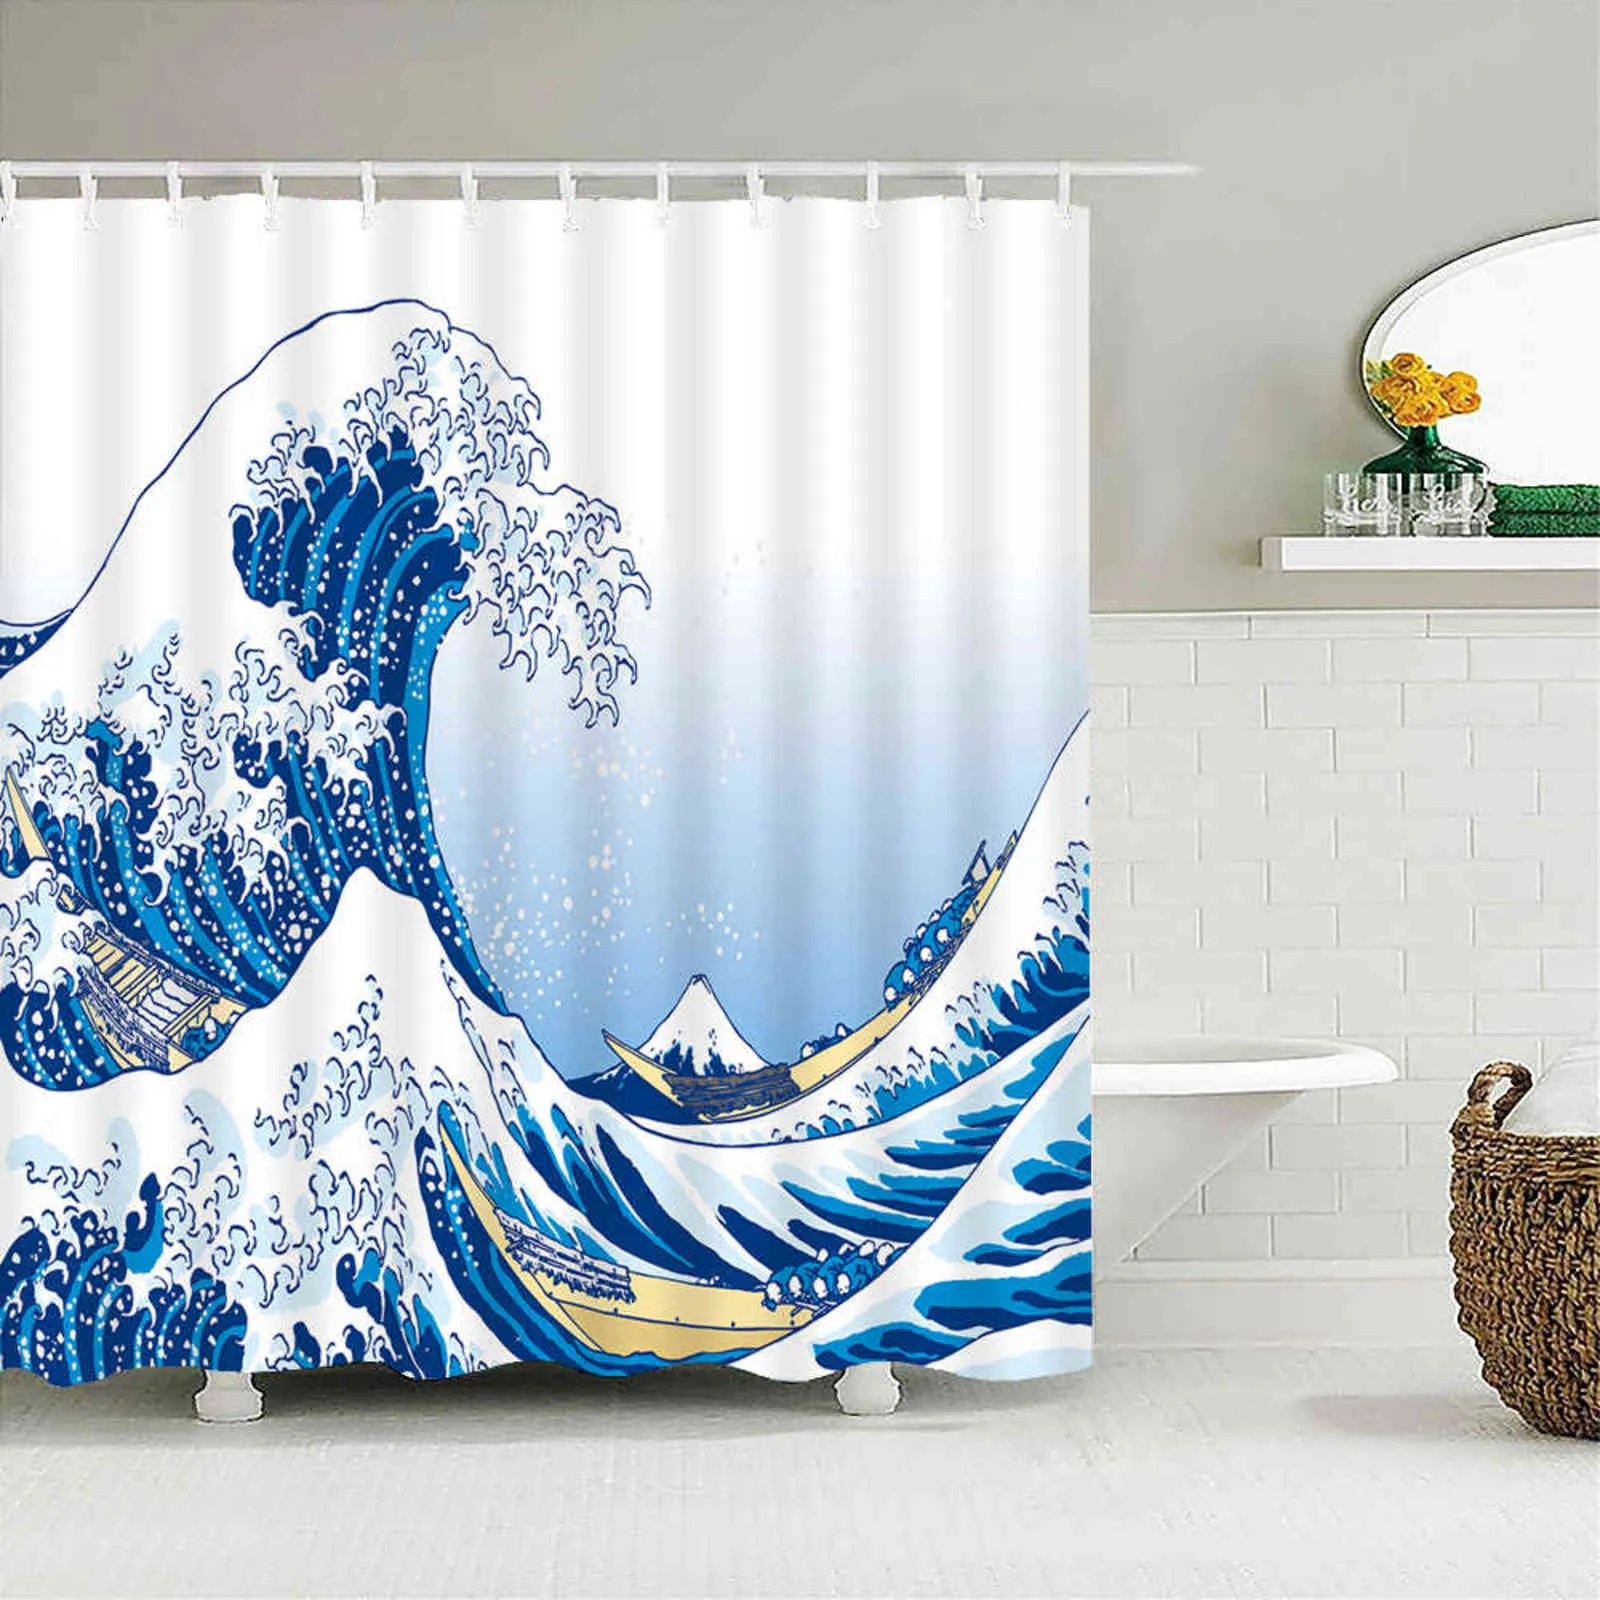 Japanese-style Shower Curtain 3d Ink Painting Bathroom Curtain Waterproof With Hooks 180*240CM Shower Curtain Polyester Fabric 211116